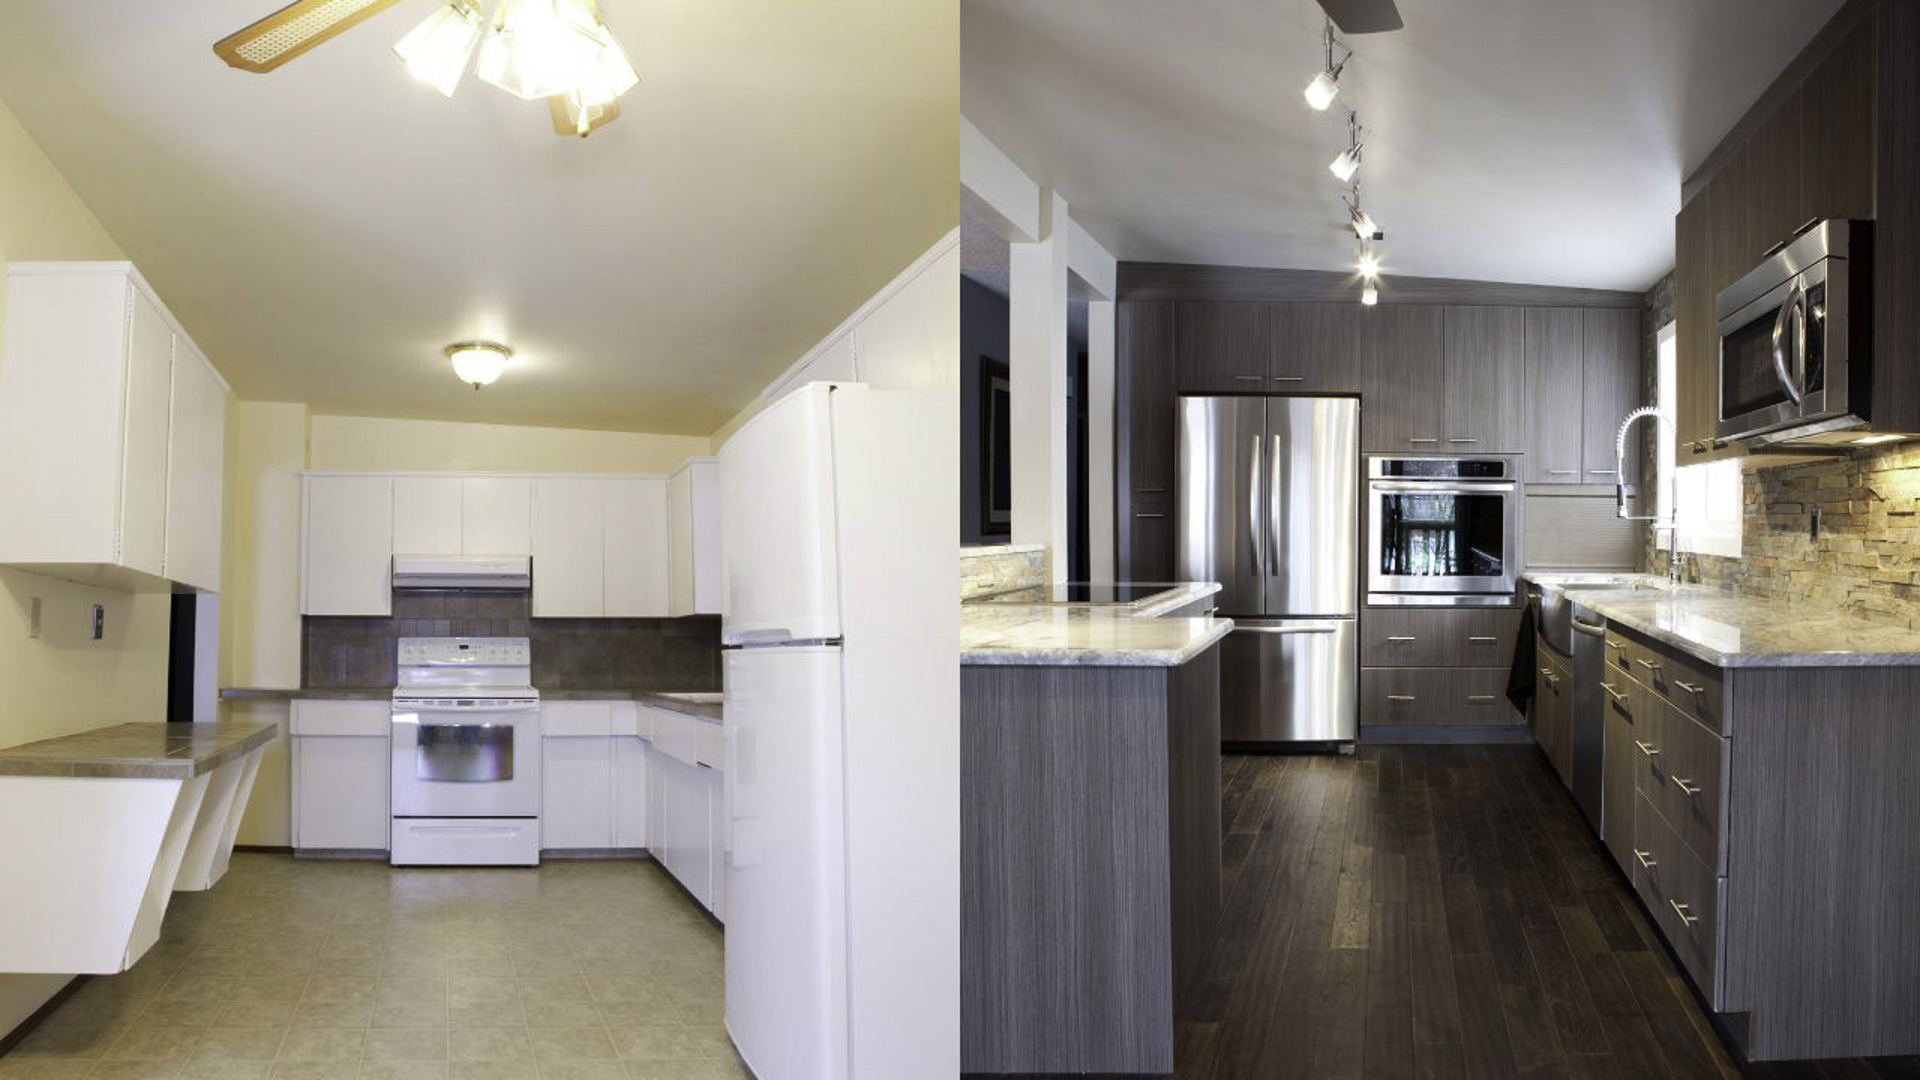 Before and after picture of a kitchen remodel rental property in Orem, Utah.